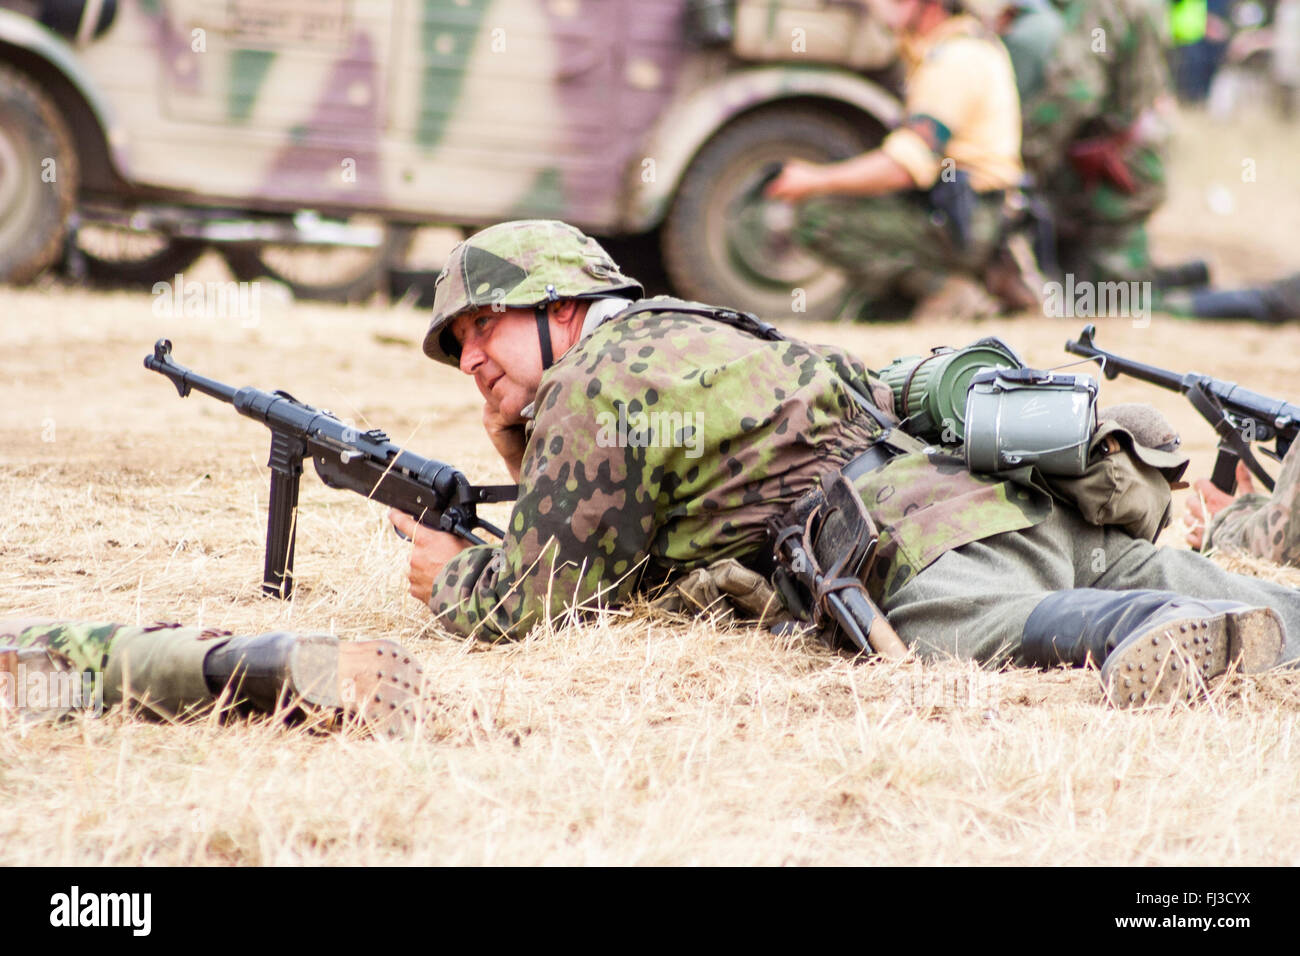 Swcond world war re-enactment. German Waffen SS soldier in dot camouflage uniform, laying in grass, holding MP 40 sub machine-gun during mock battle. Stock Photo